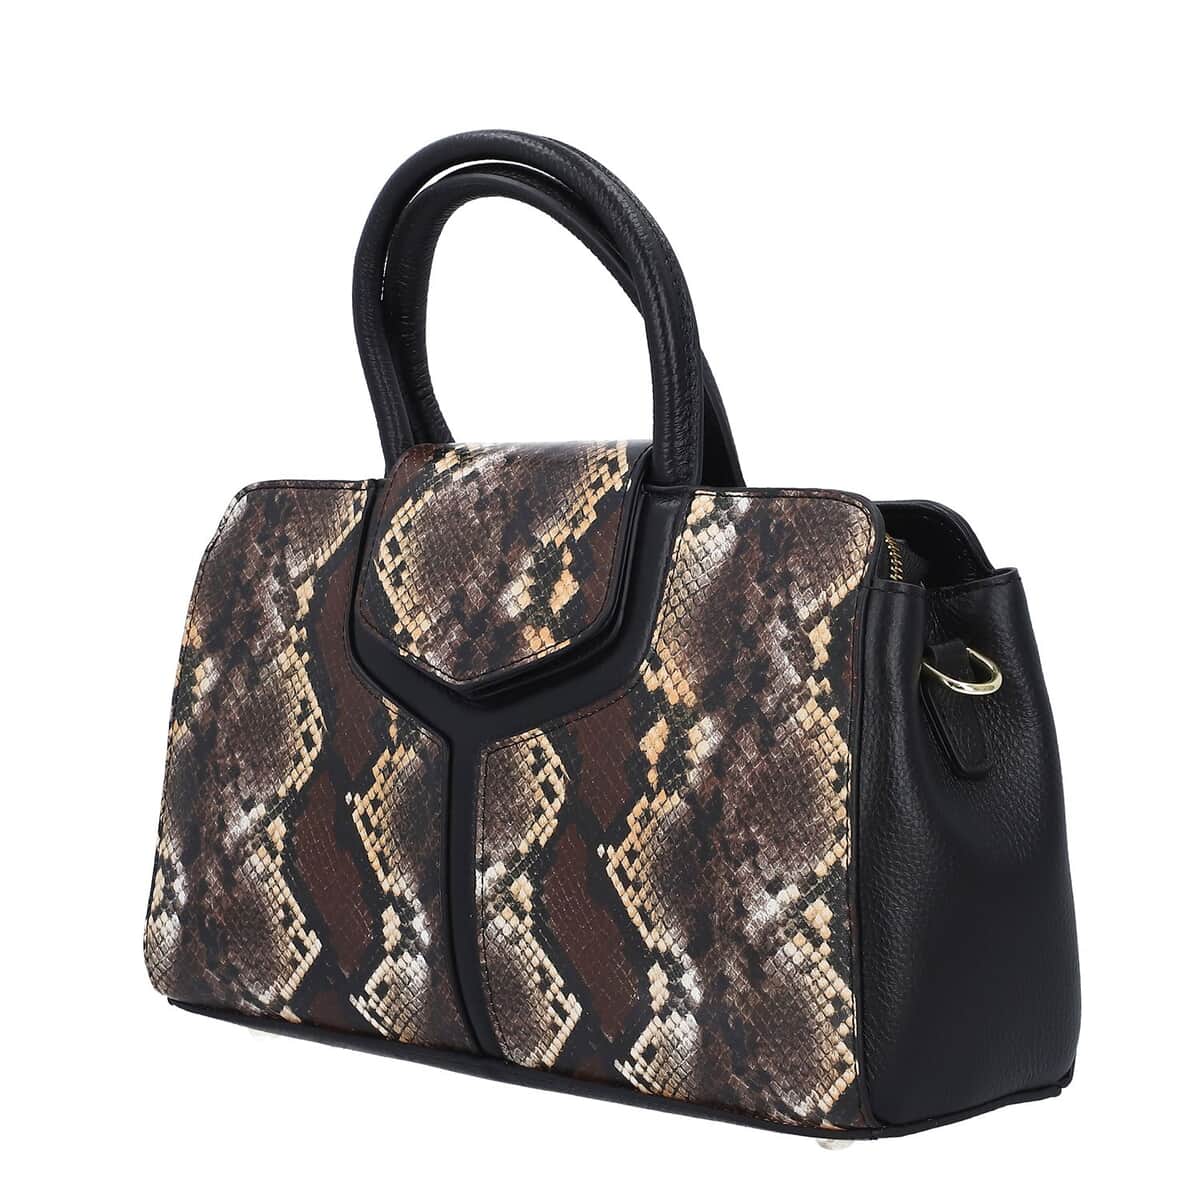 Black and Brown Snake Print Genuine Leather Convertible Tote Bag with Shoulder Strap image number 5